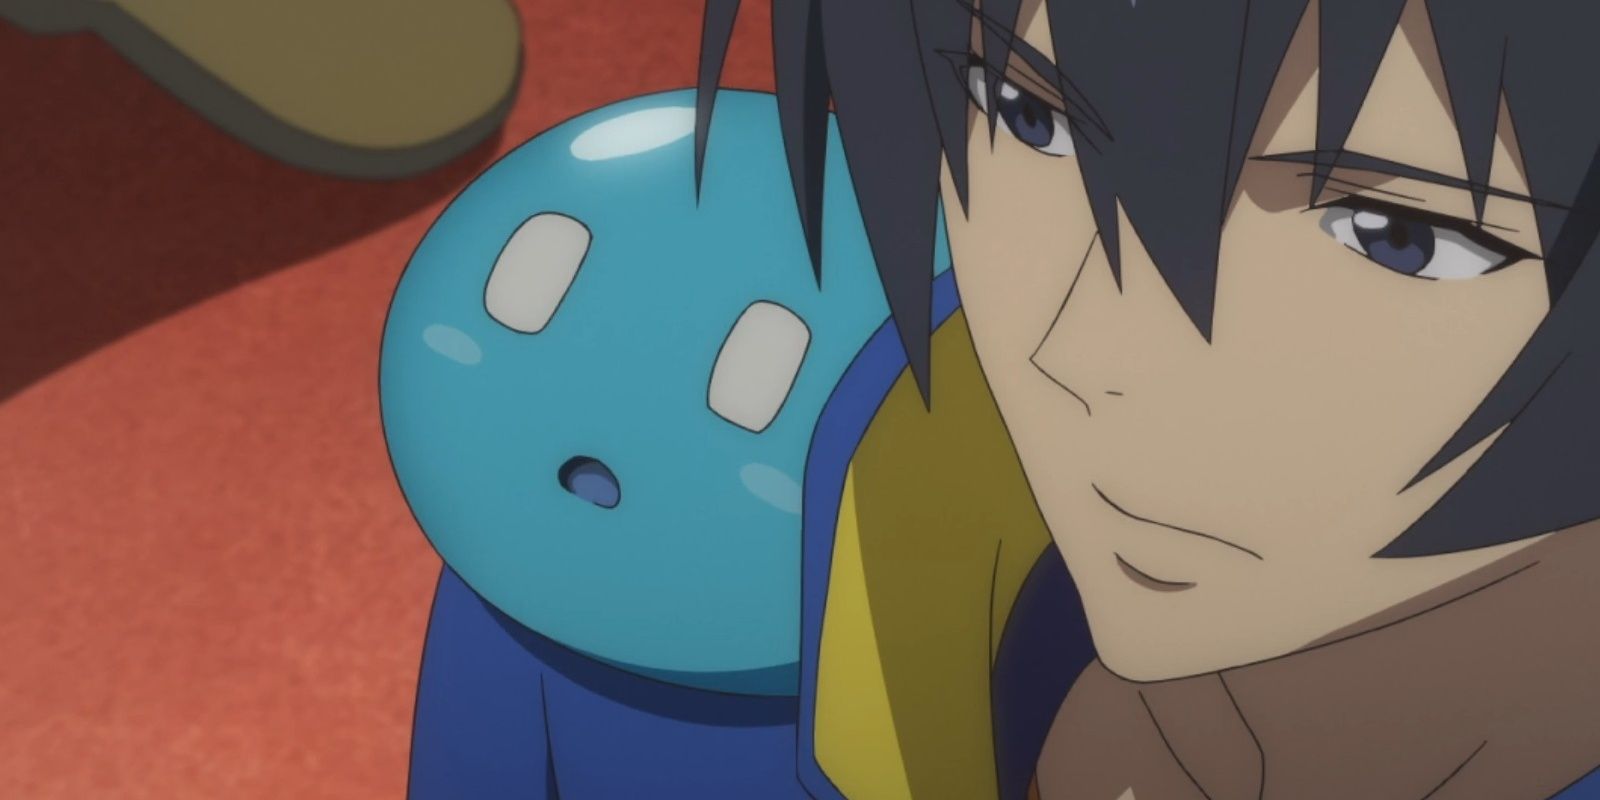 Anime boy with a blue demon slime-like appearance in a fantasy world